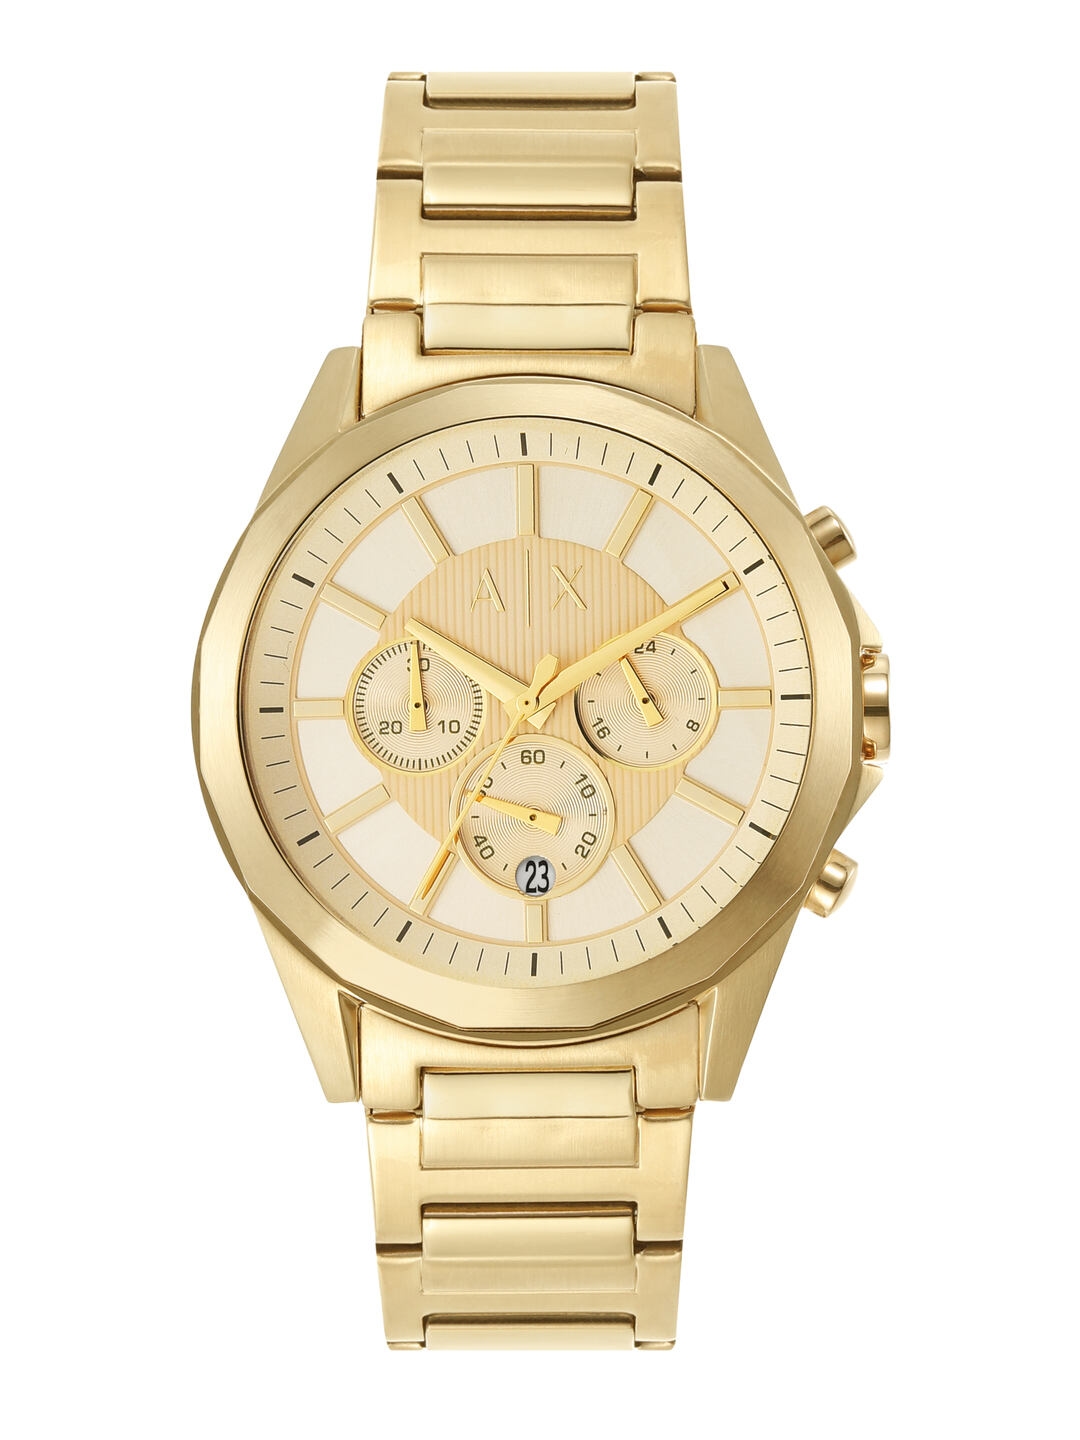 Watches Men AX2602I Analogue for Myntra Exchange Men | Buy - Gold 1821629 Watch Toned Armani